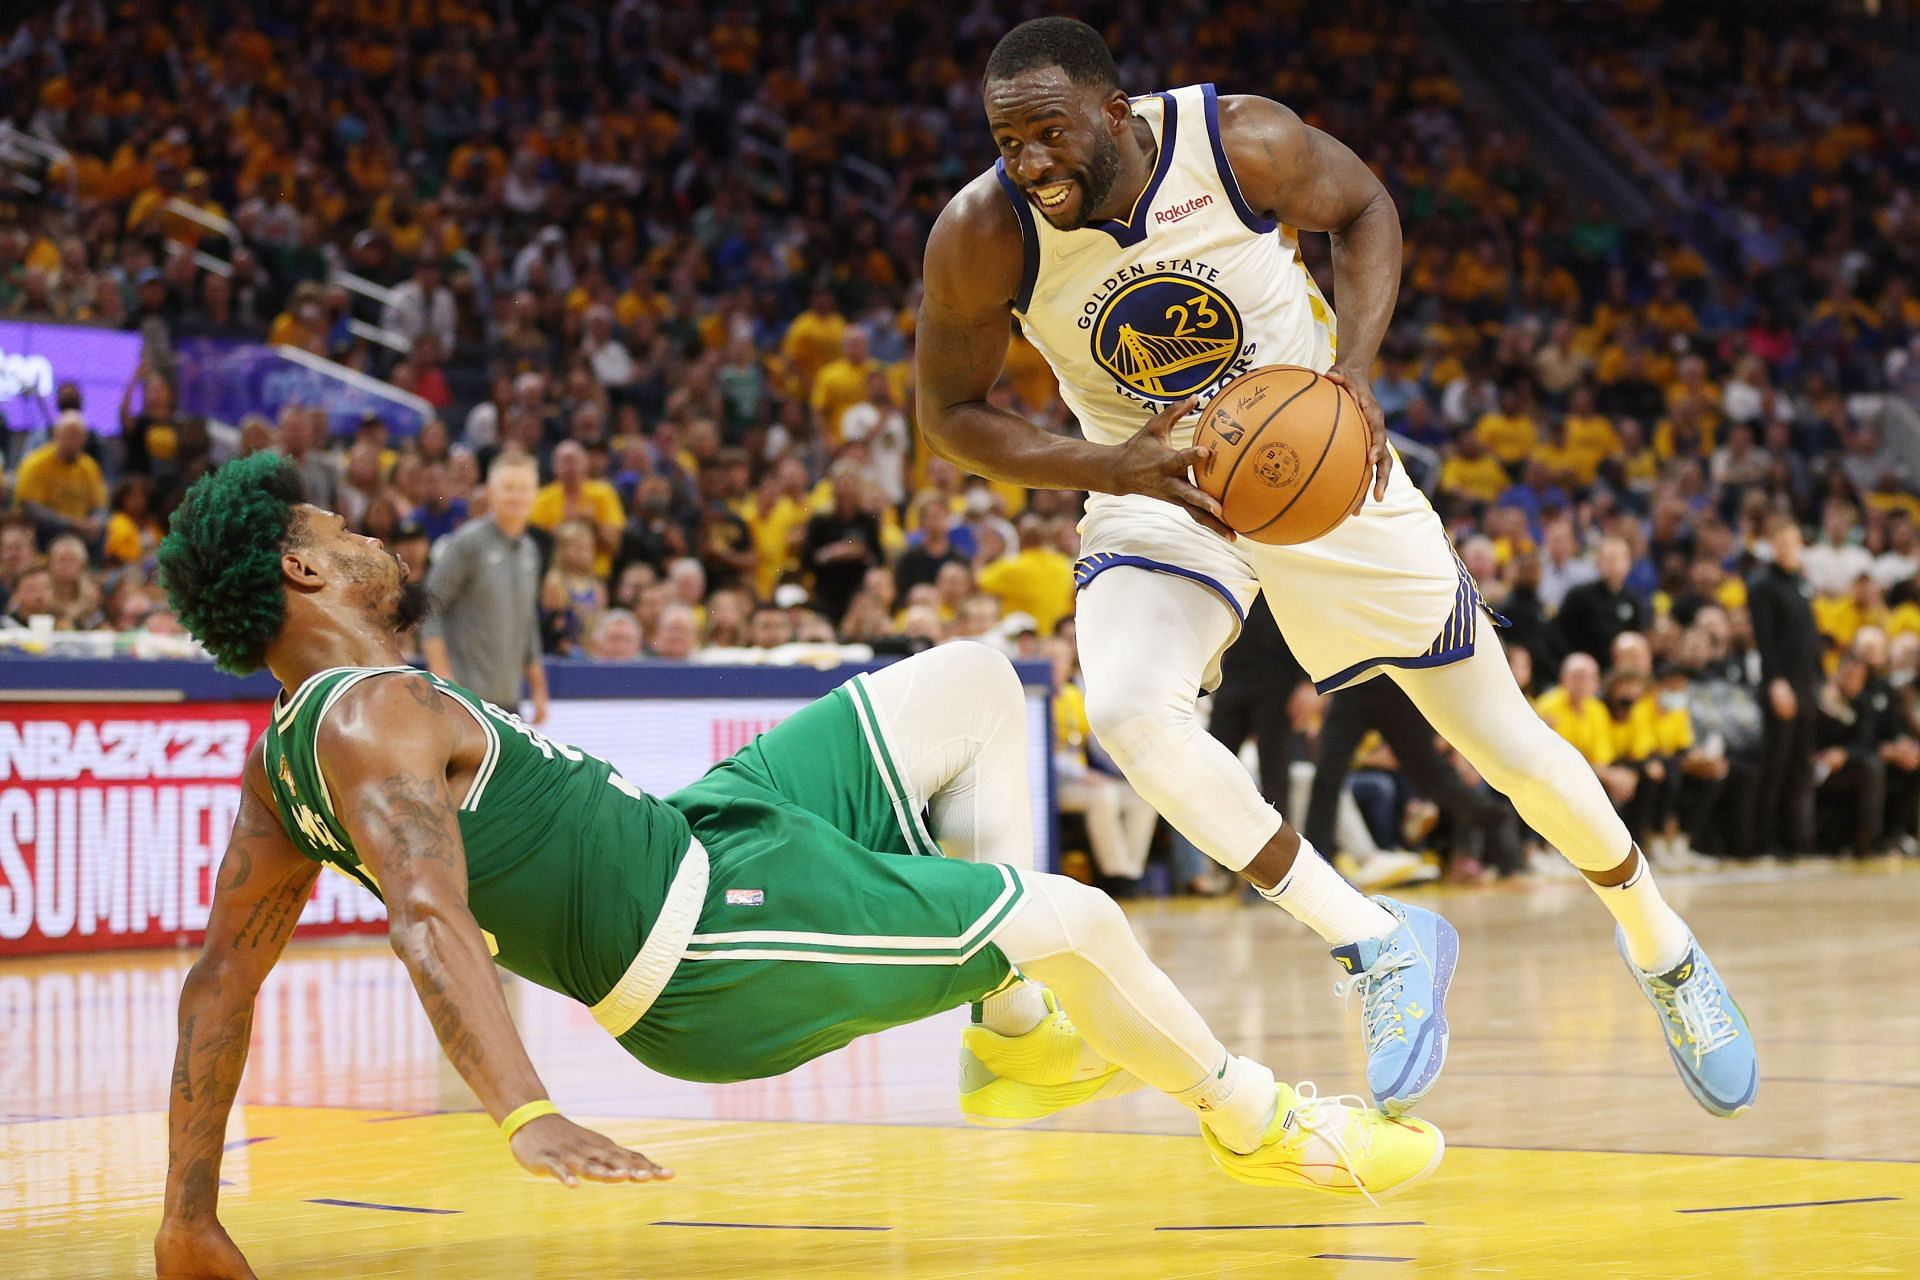 Draymond Green bumps into Marcus Smart during 2022 NBA Finals - Game 2